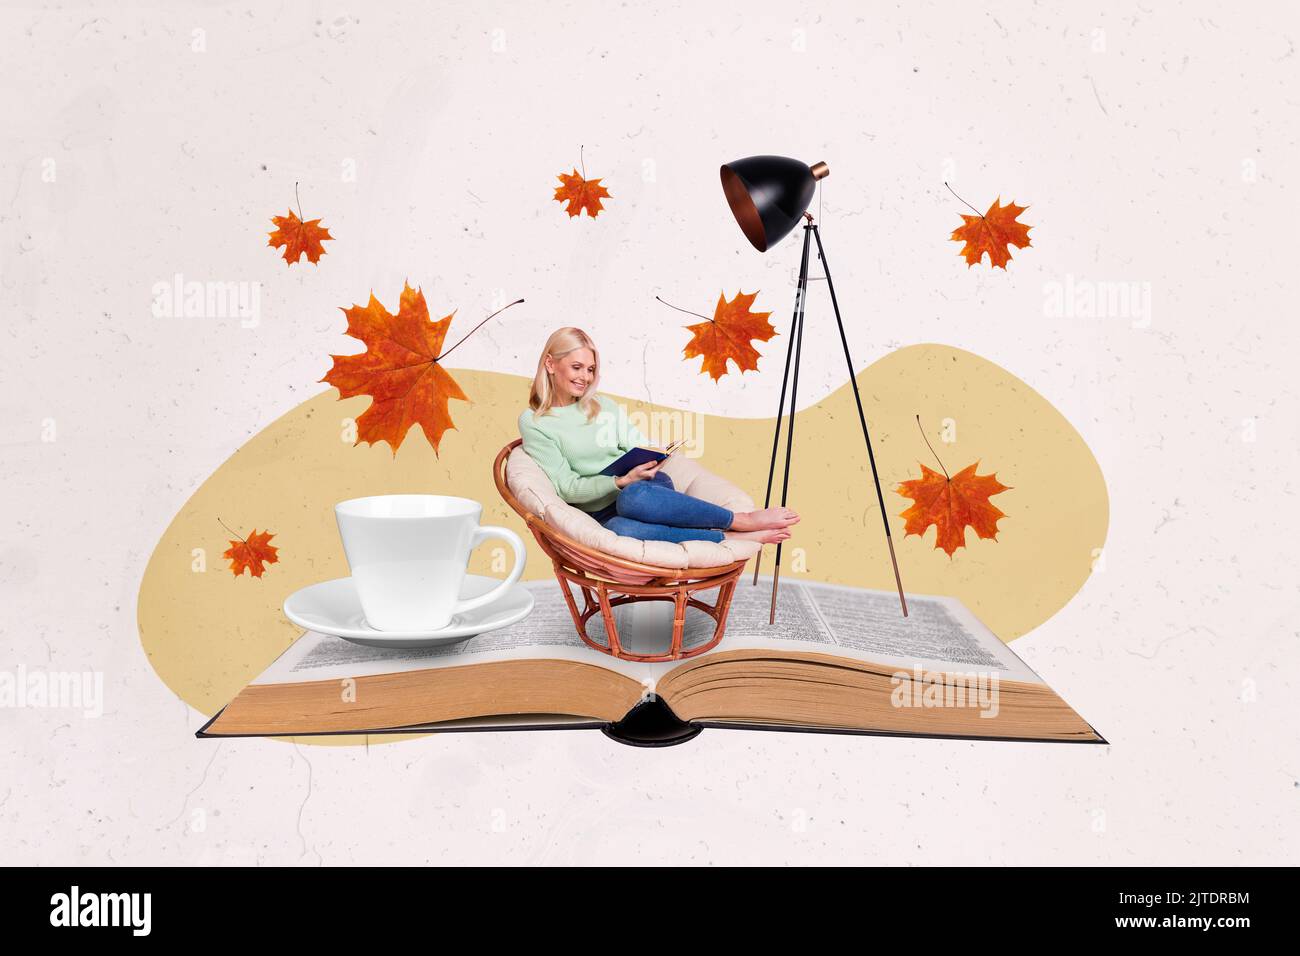 Creative collage photo of woman sit in chair read book resting relaxing drink cacao autumn leaves fall isolated on beige color background Stock Photo